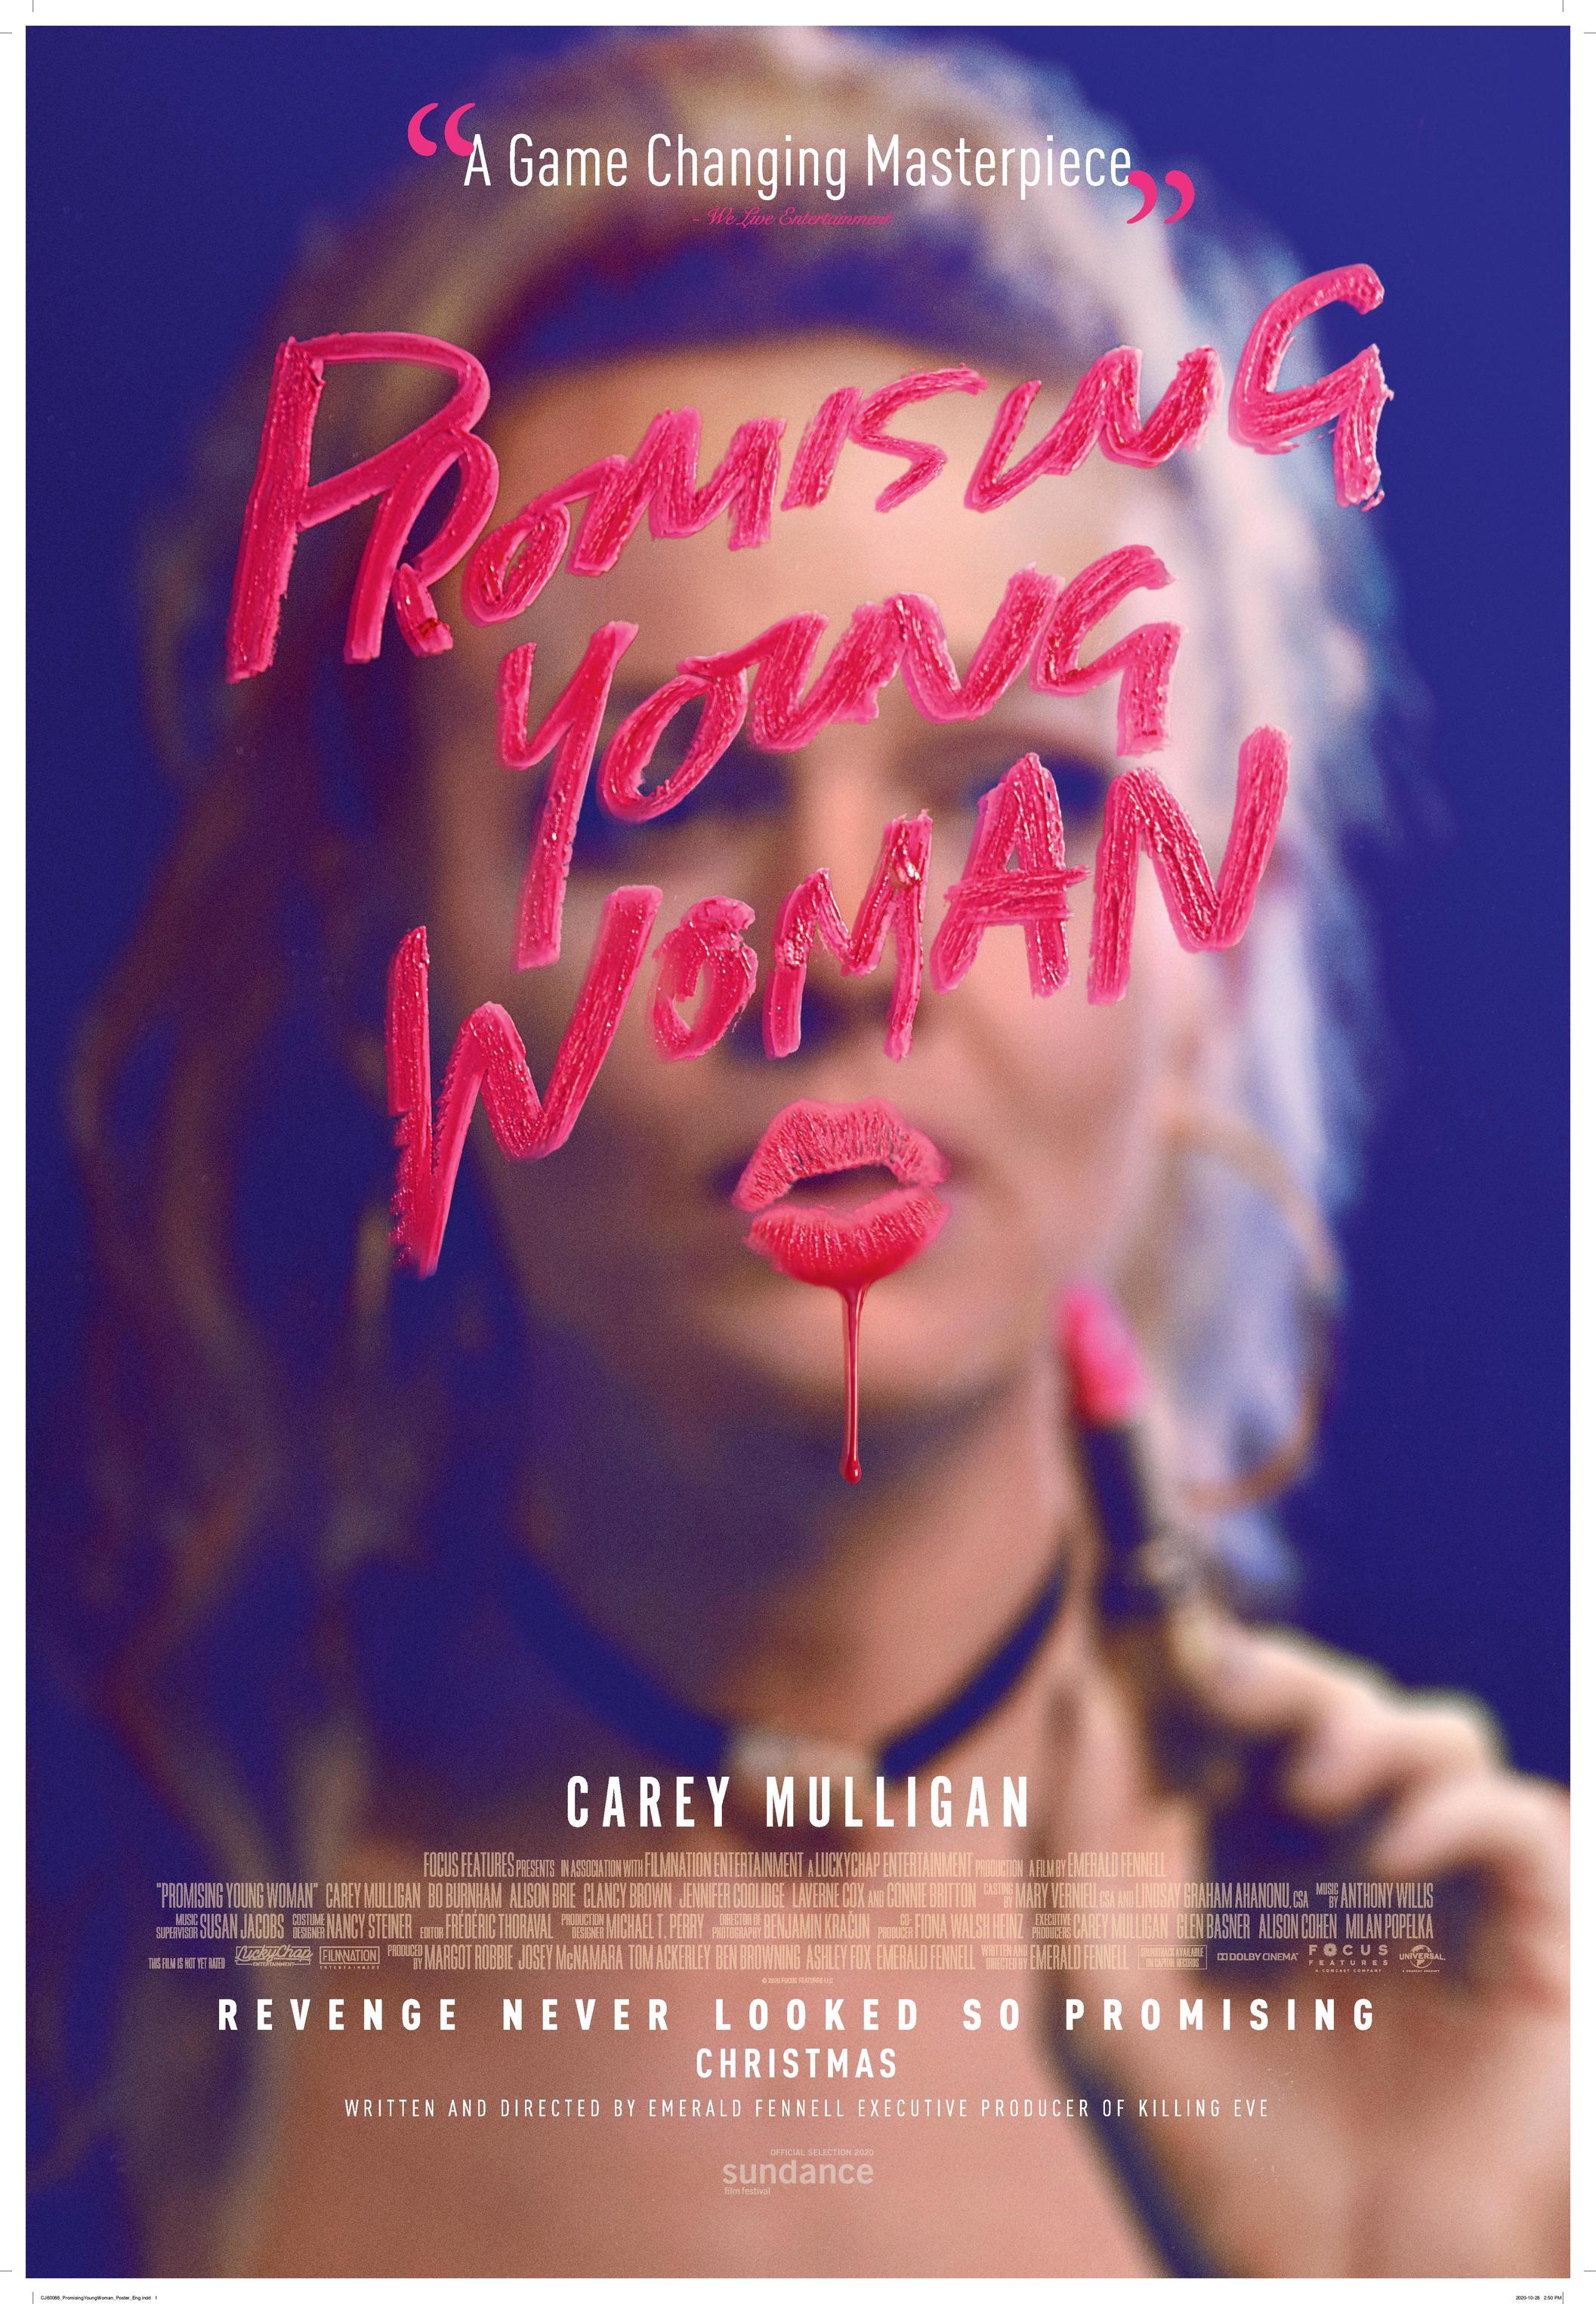 A young woman writes the title of the film in lipstick, with the lip mark superimposed over her own lips 